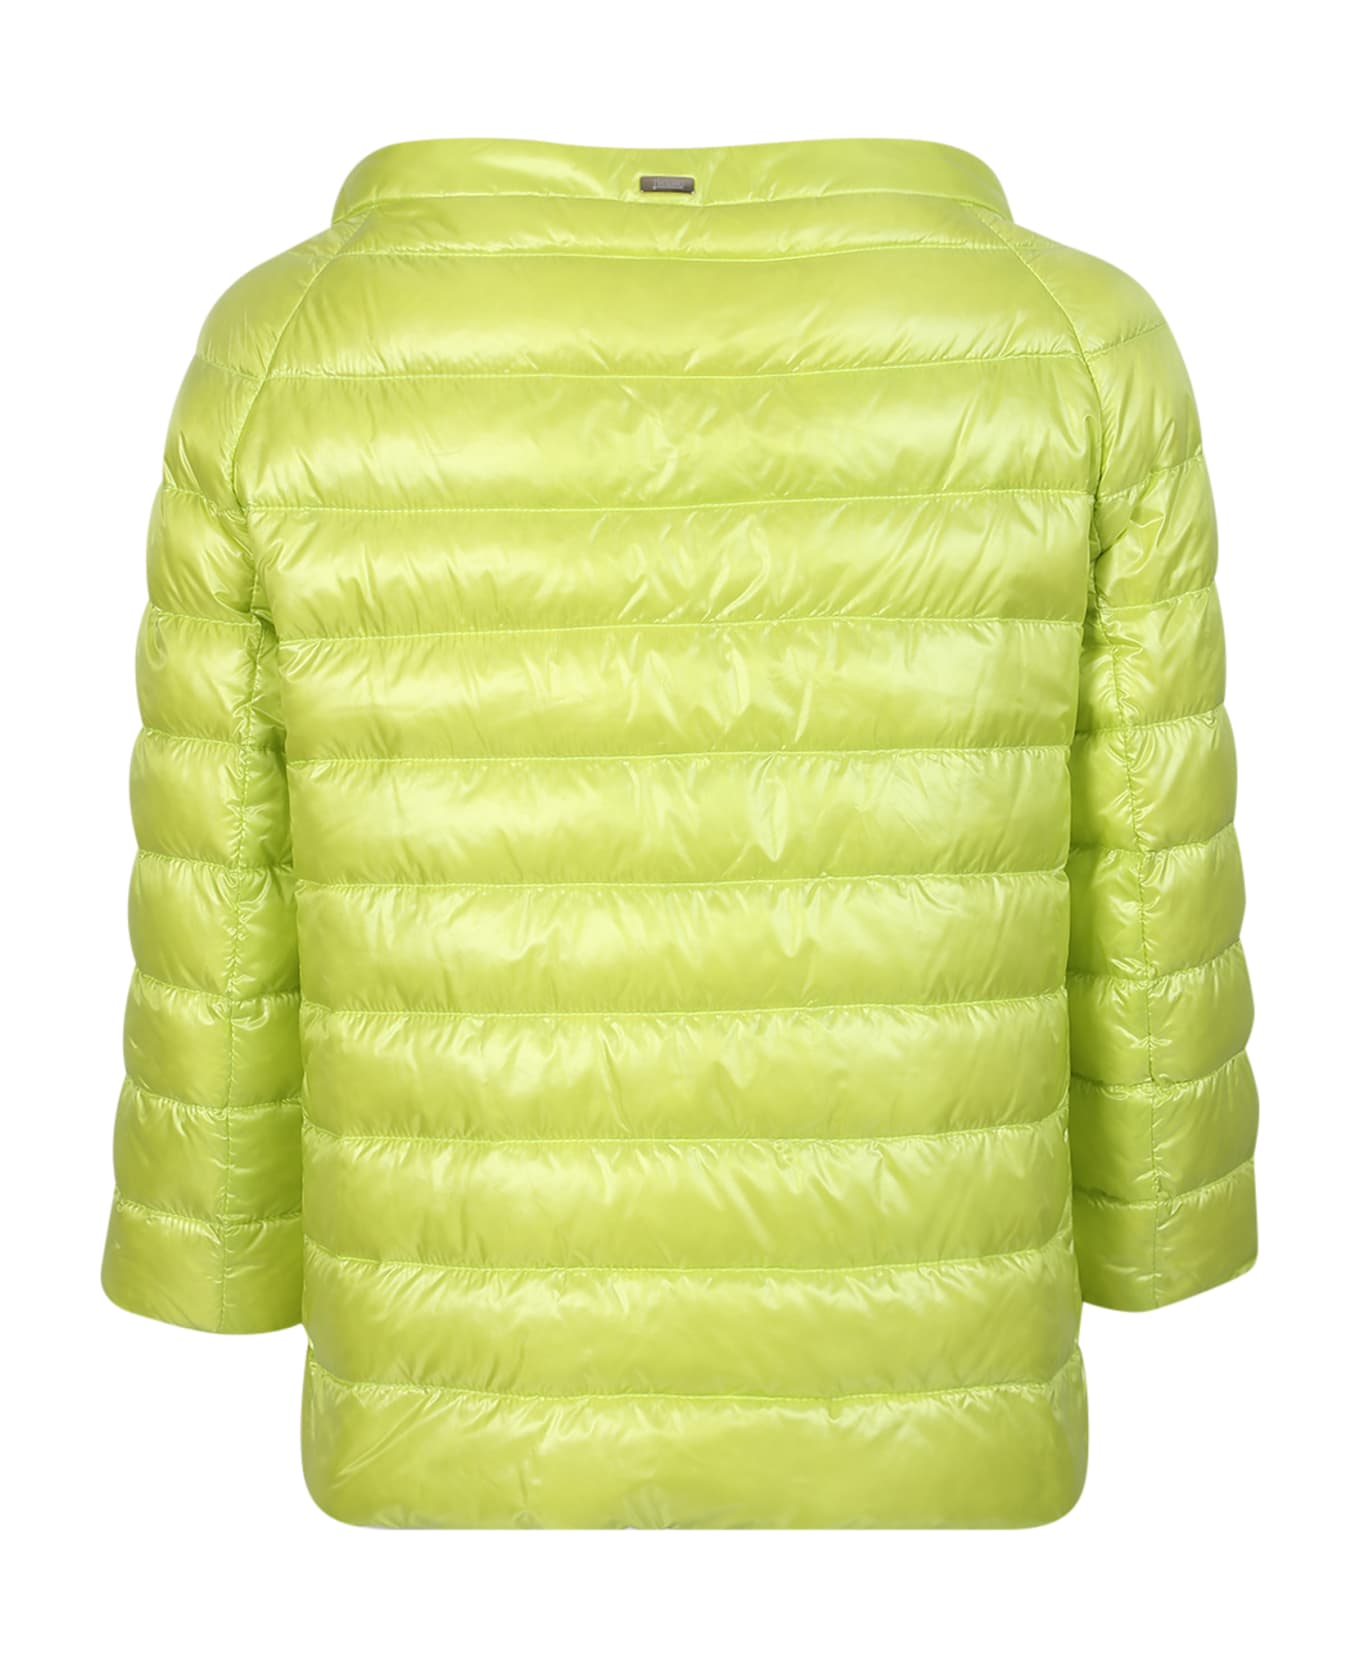 Herno Wide Boat Neck Yellow Jacket - Yellow